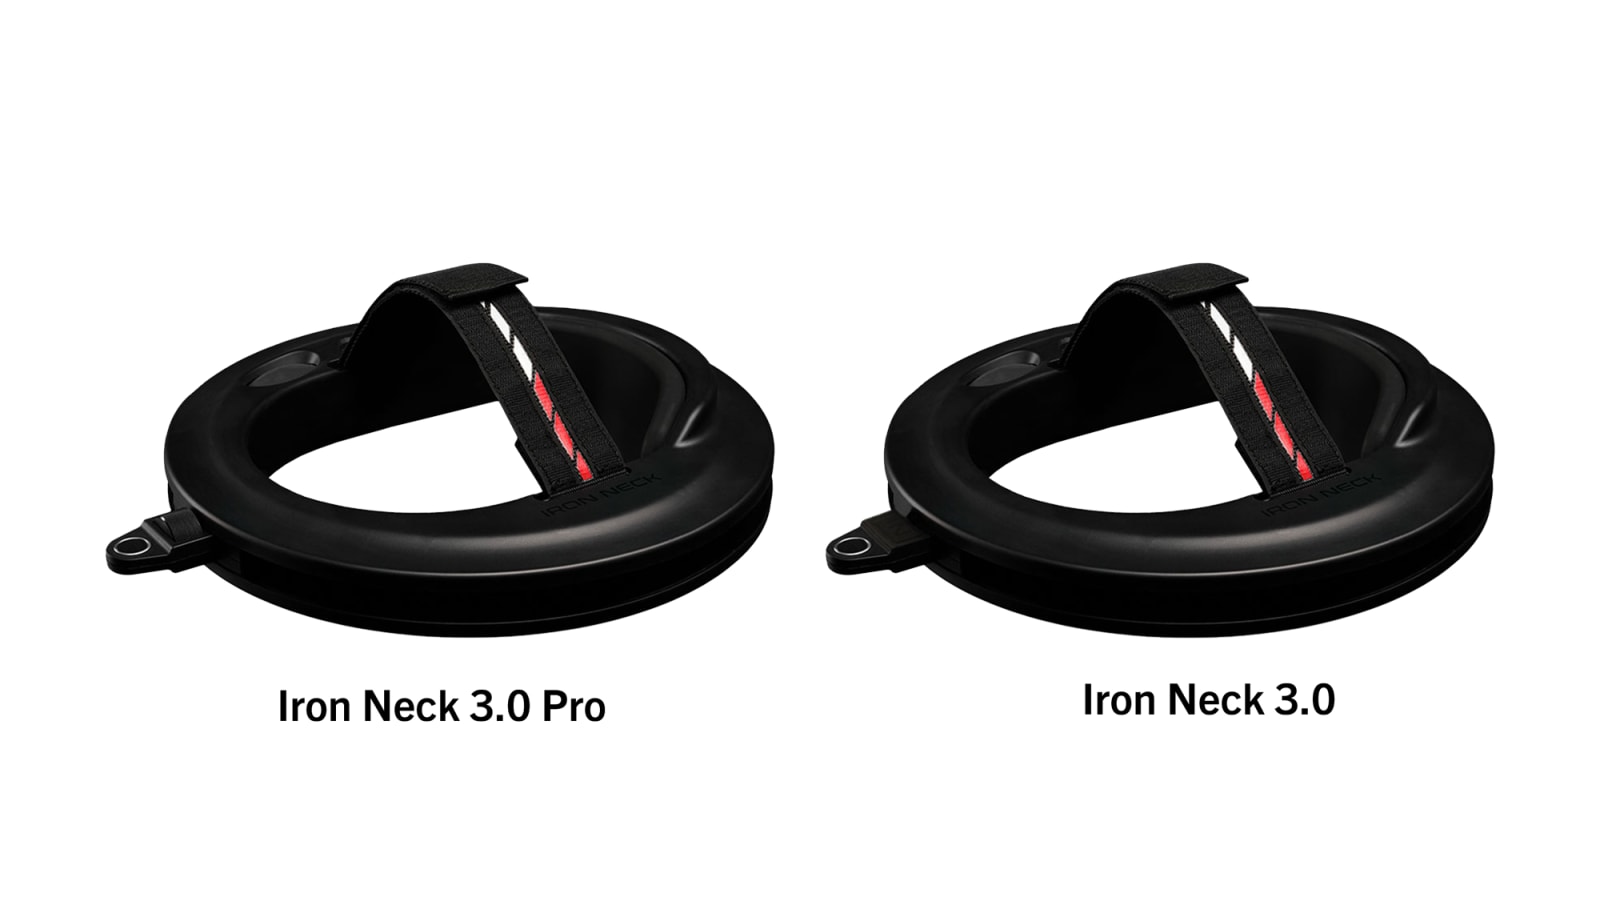 Iron Neck Review: Is the Iron Neck Worth It?